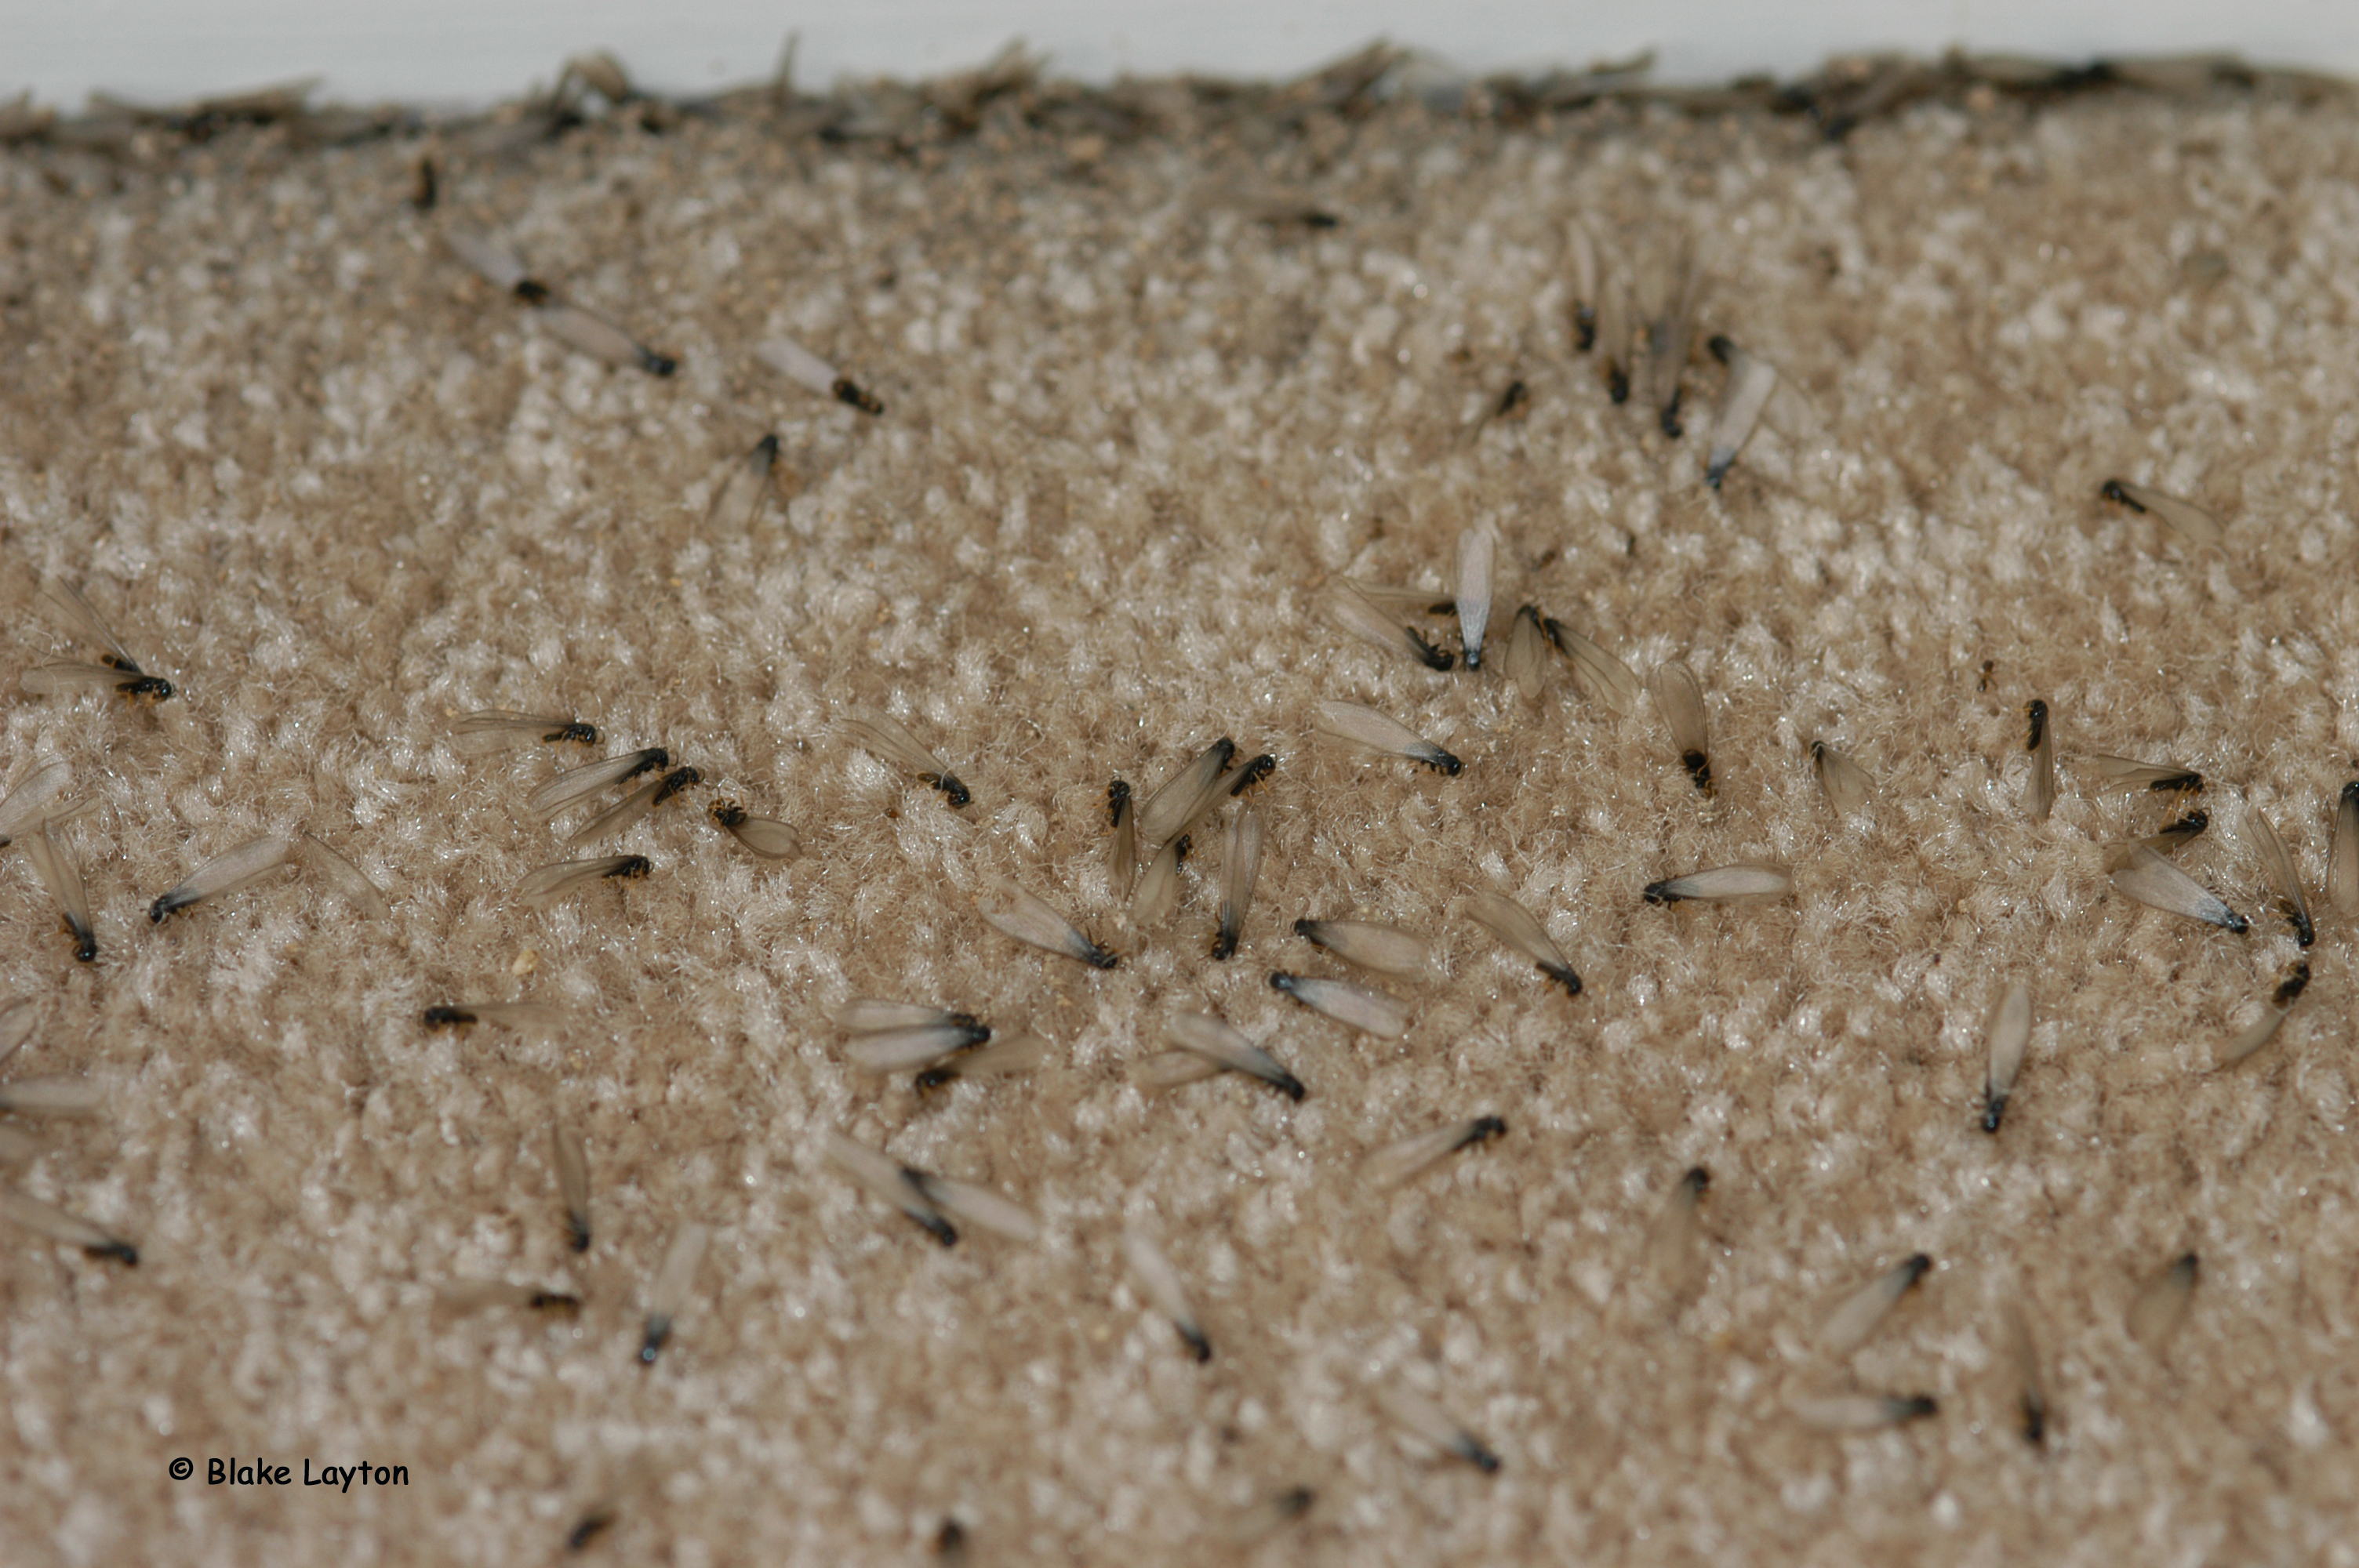 Accumulation of dead eastern subterranean swarmers on carpet.  These were behind a couch and were discovered when the couch was moved.  The swarm had occurred several weeks earlier, but was not noticed then.